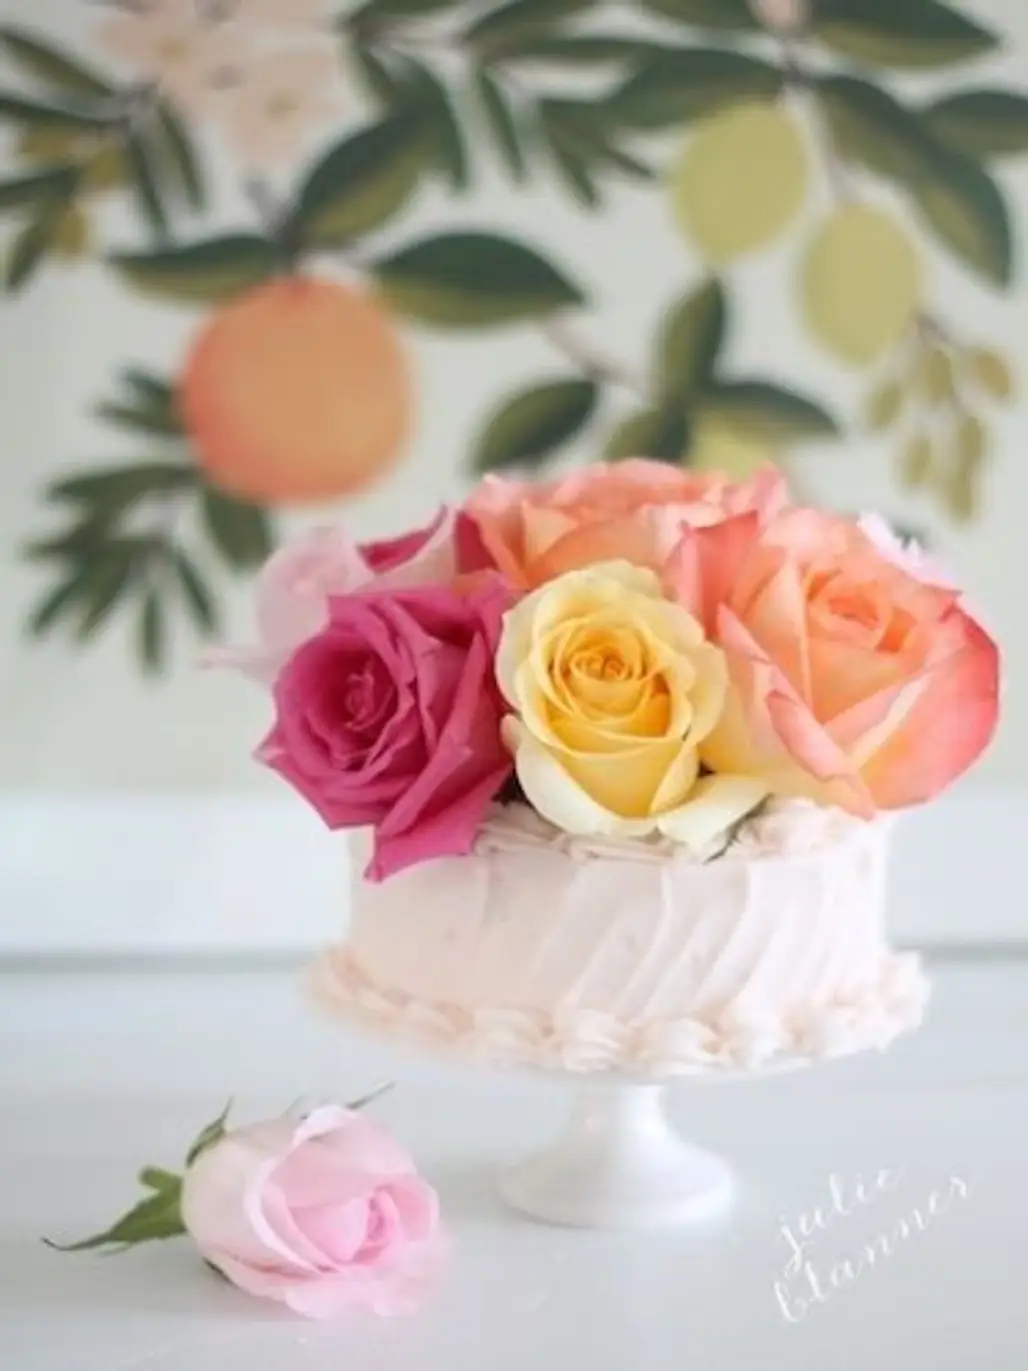 How to Decorate a Cake with Fresh Flowers